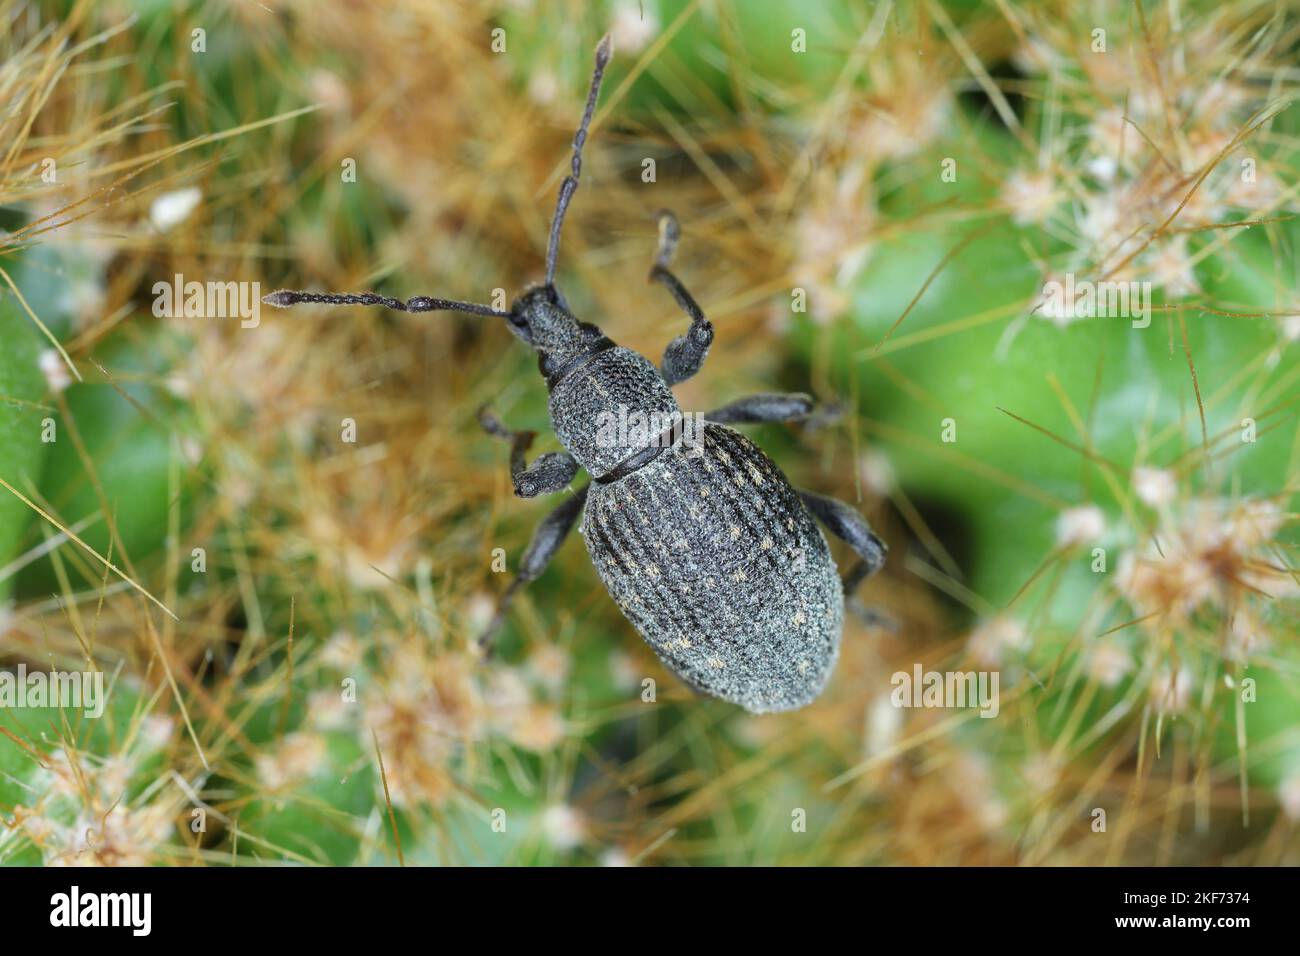 Beetle of Otiorhynchus, sometimes Otiorrhynchus on a cactus. Many of them e.i. black vine weevil (O. sulcatus) or strawberry root weevil (O. ovatus. Stock Photo